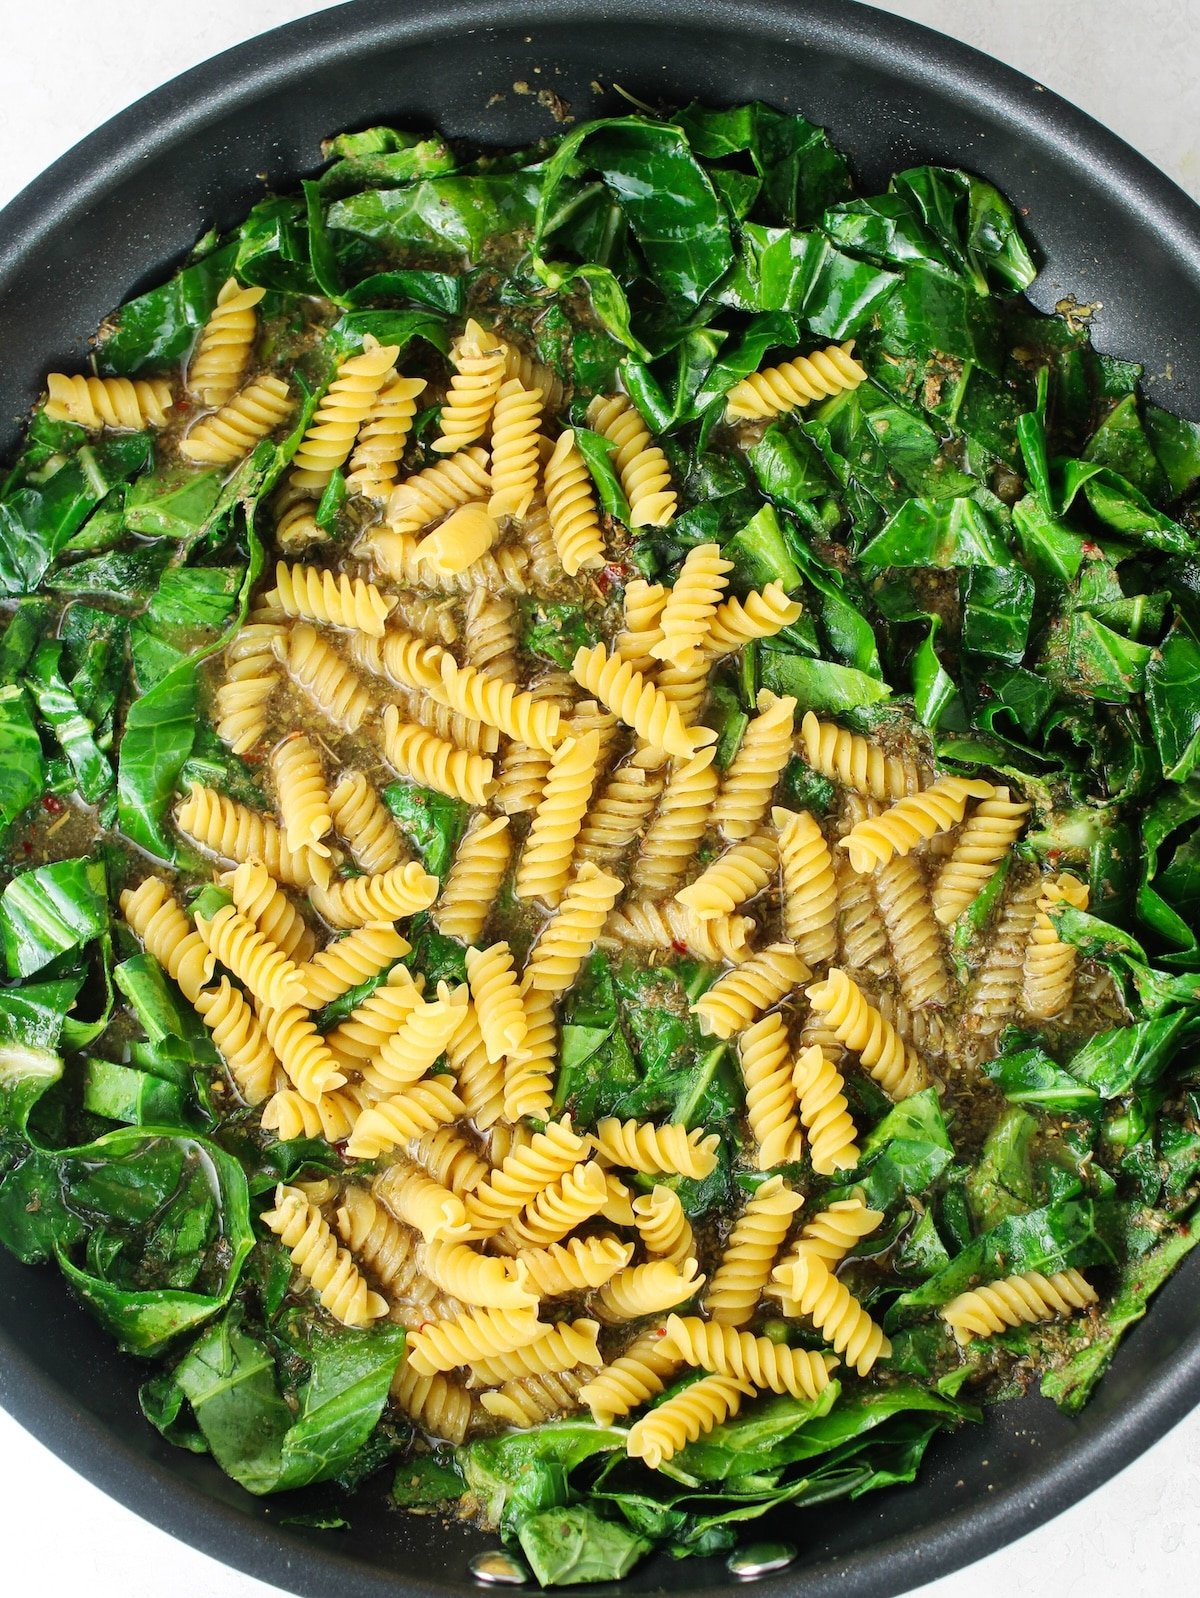 A pan with liquid, seasonings, pasta and greens cooking on the stovetop.